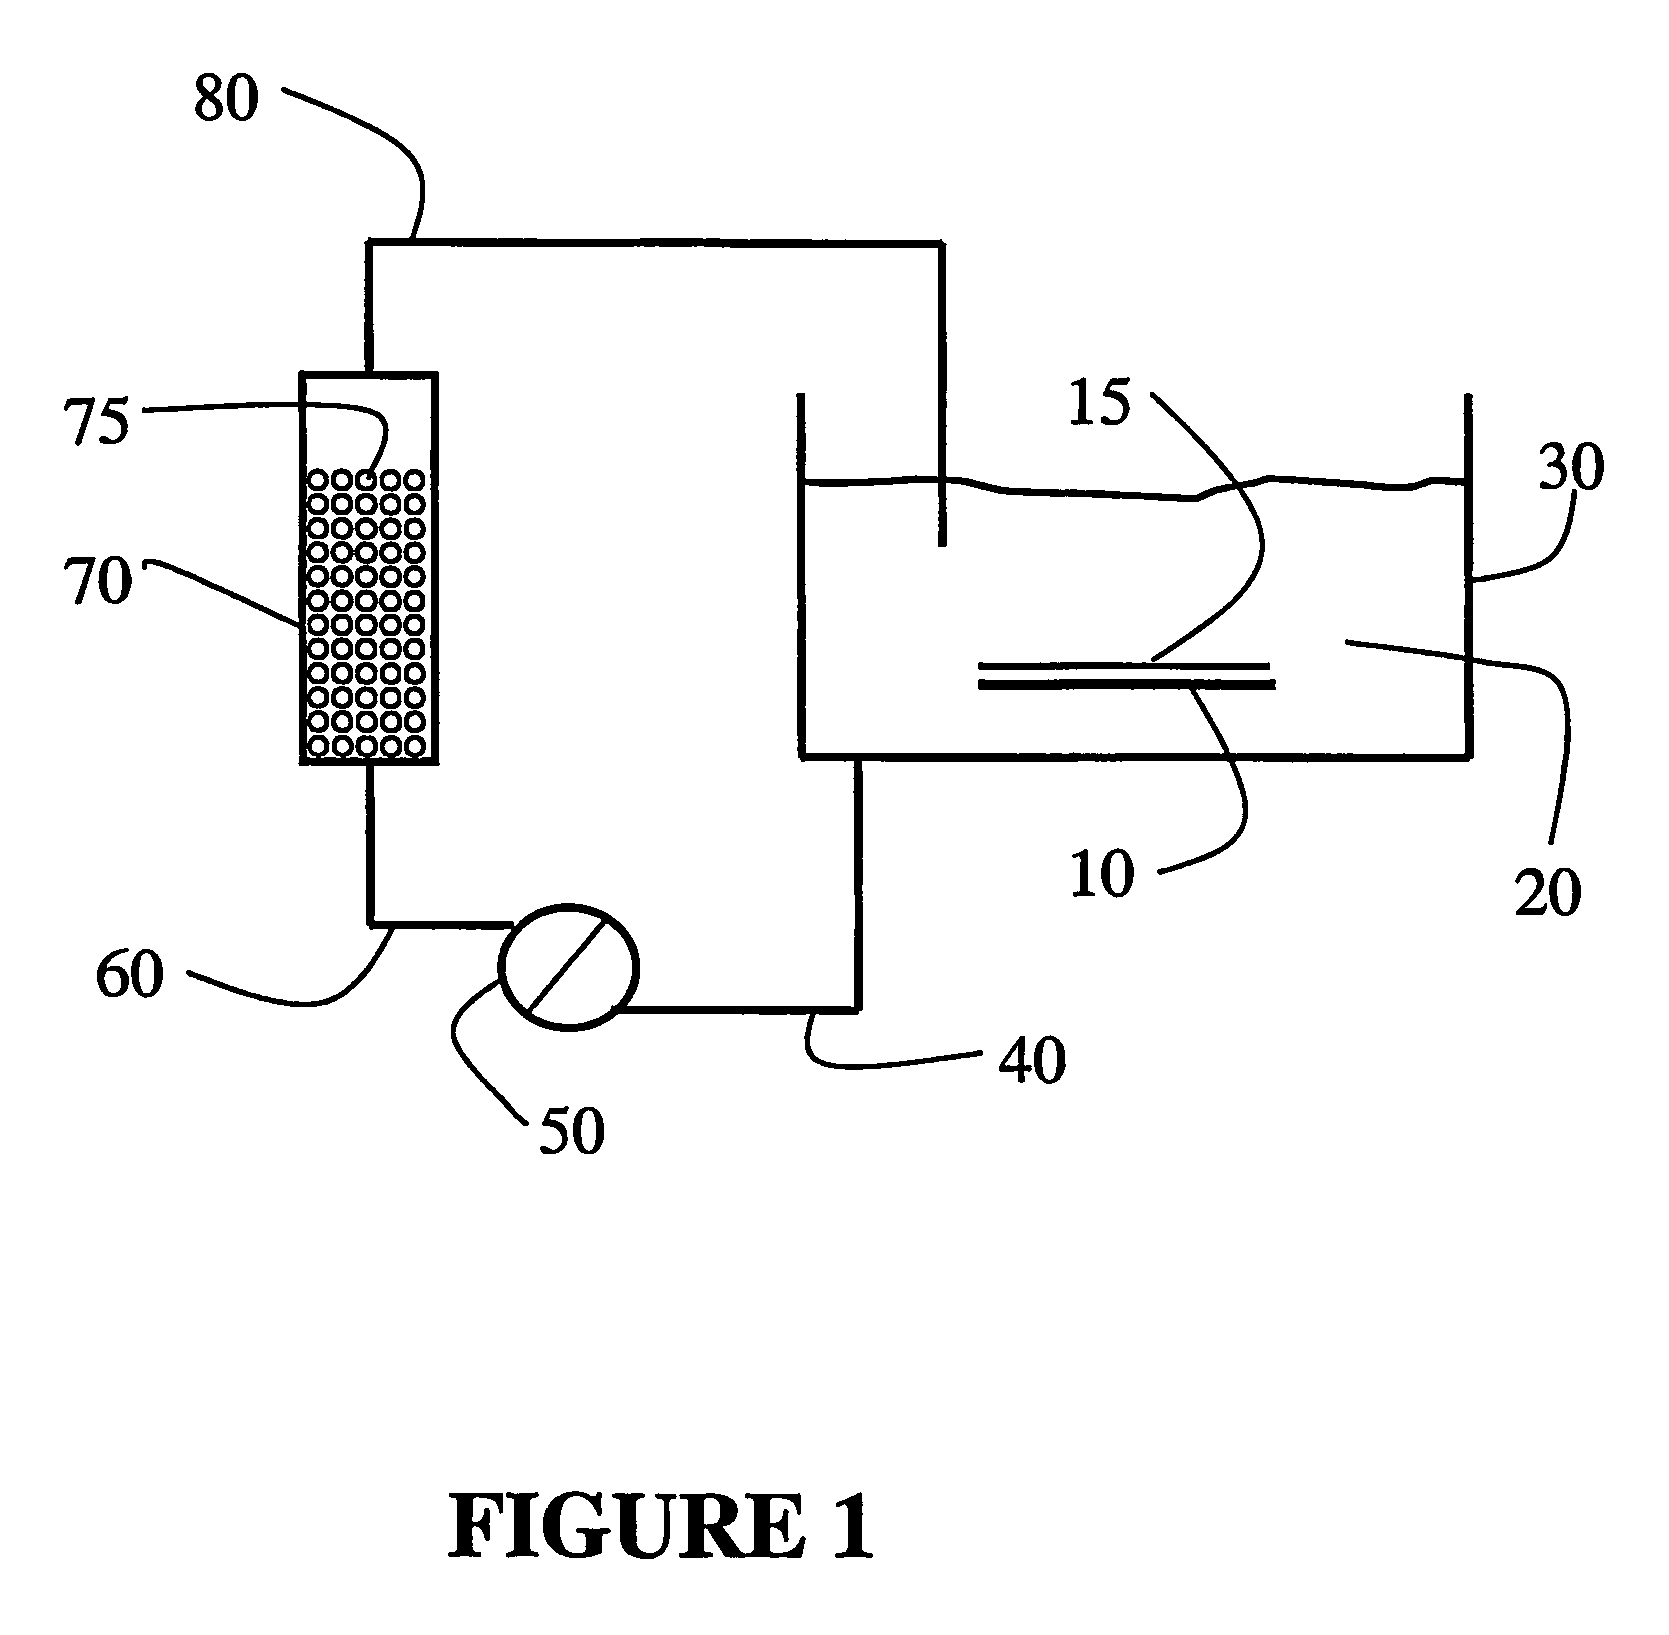 Method for low temperature growth of inorganic materials from solution using catalyzed growth and re-growth